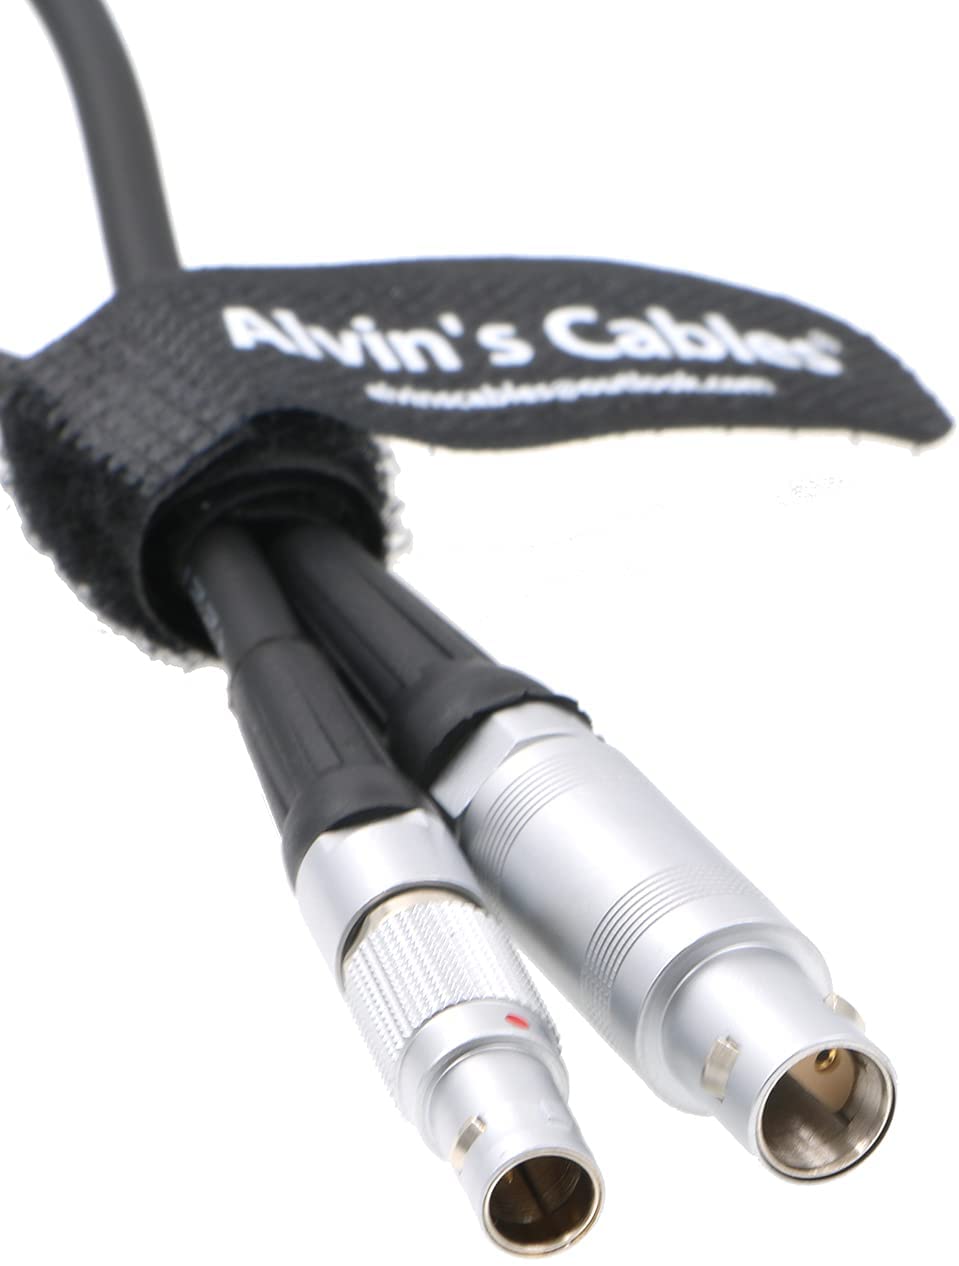 Alvin's Cables 1S.303 to 2 Pin Male Power Cable for Bartech Focus Device Receiver Artemis Letus Redrock Hedén Steadicam from Sachtler Artemis